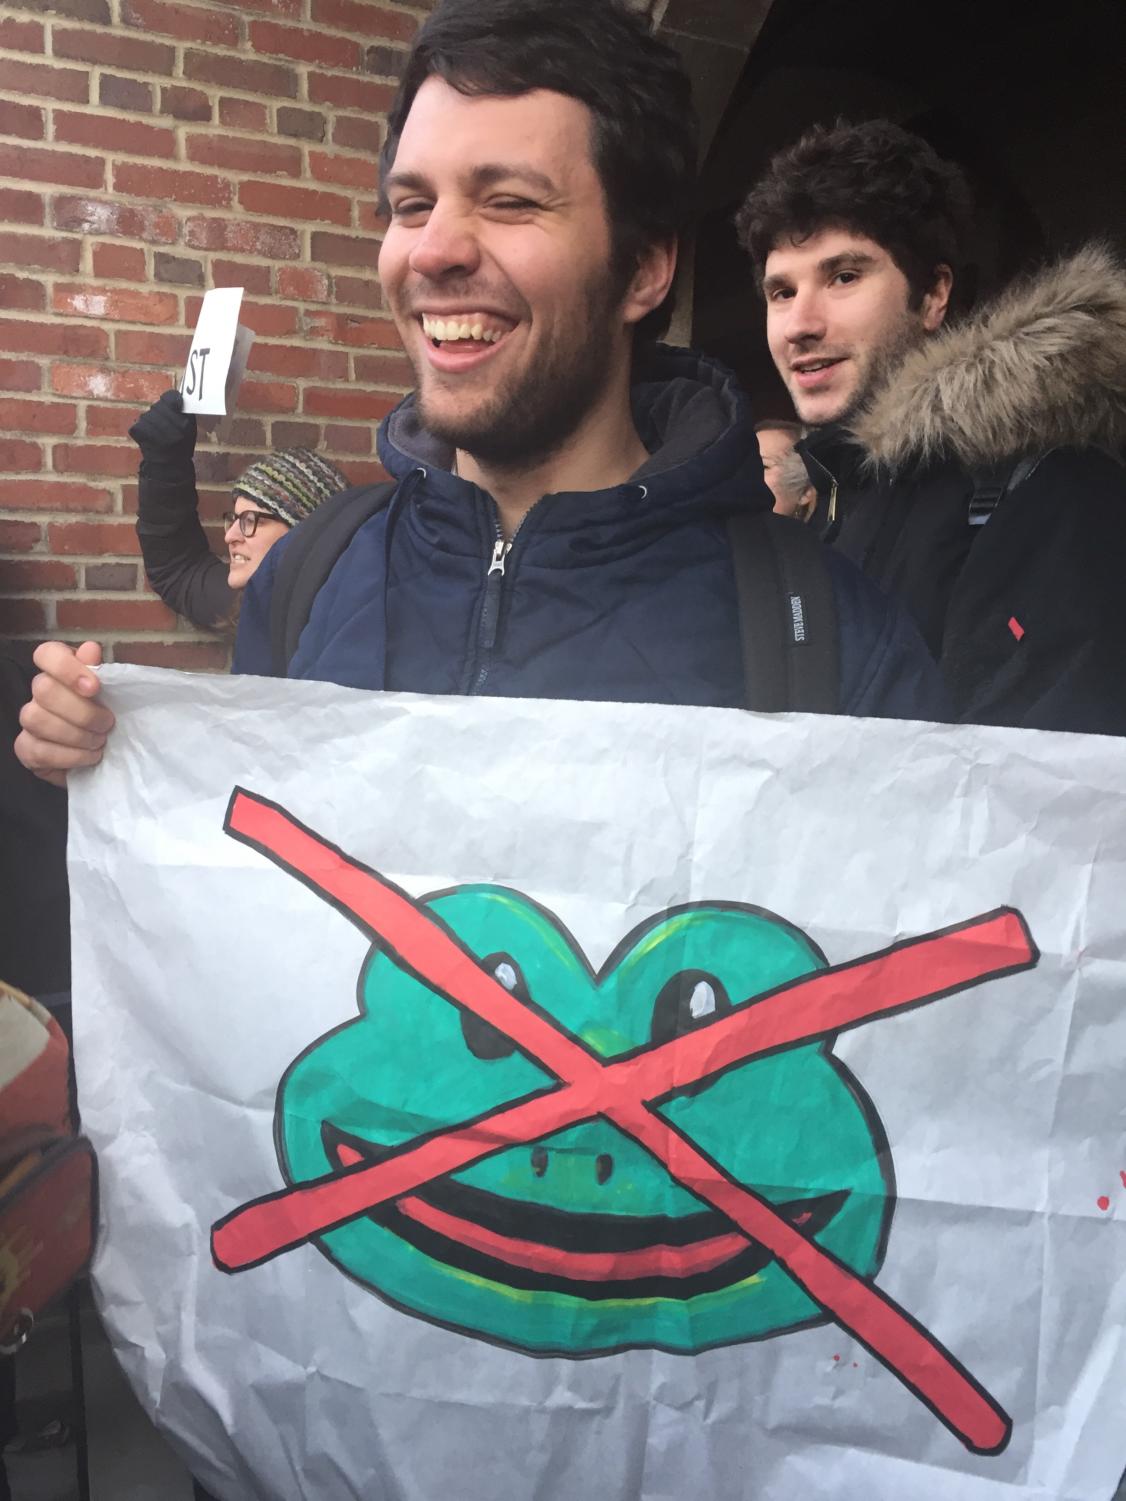 Fourth-year Jake Bittle holds up a sign crossing out white nationalist symbol Pepe the Frog. “The IOP is garbage,” Bittle said.